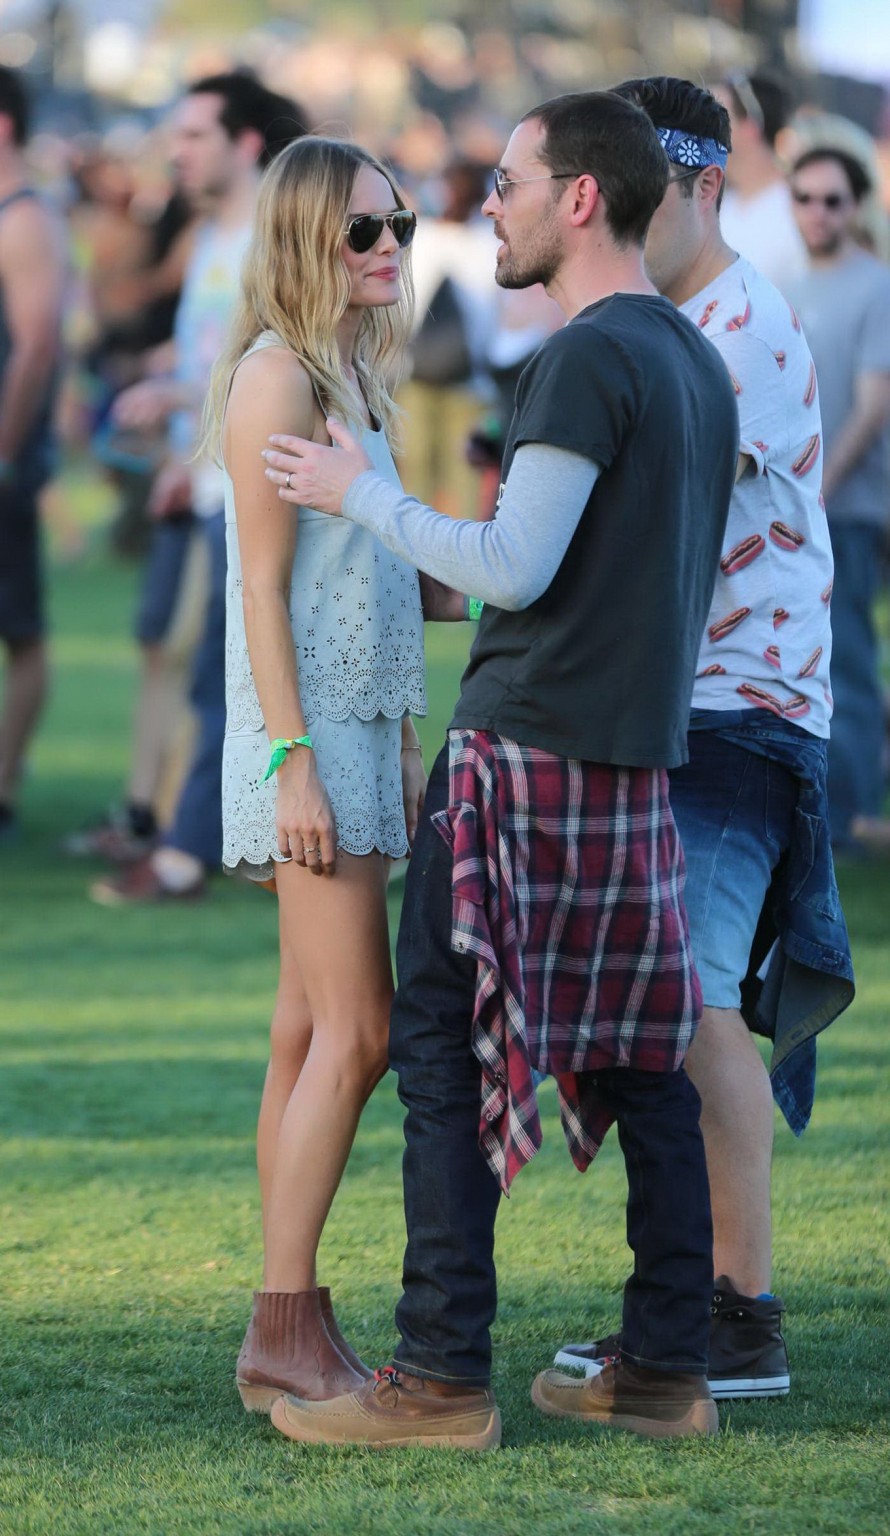 Kate Bosworth leggy wearing retro shorts and top at Coachella Music and Arts Fes #75235382